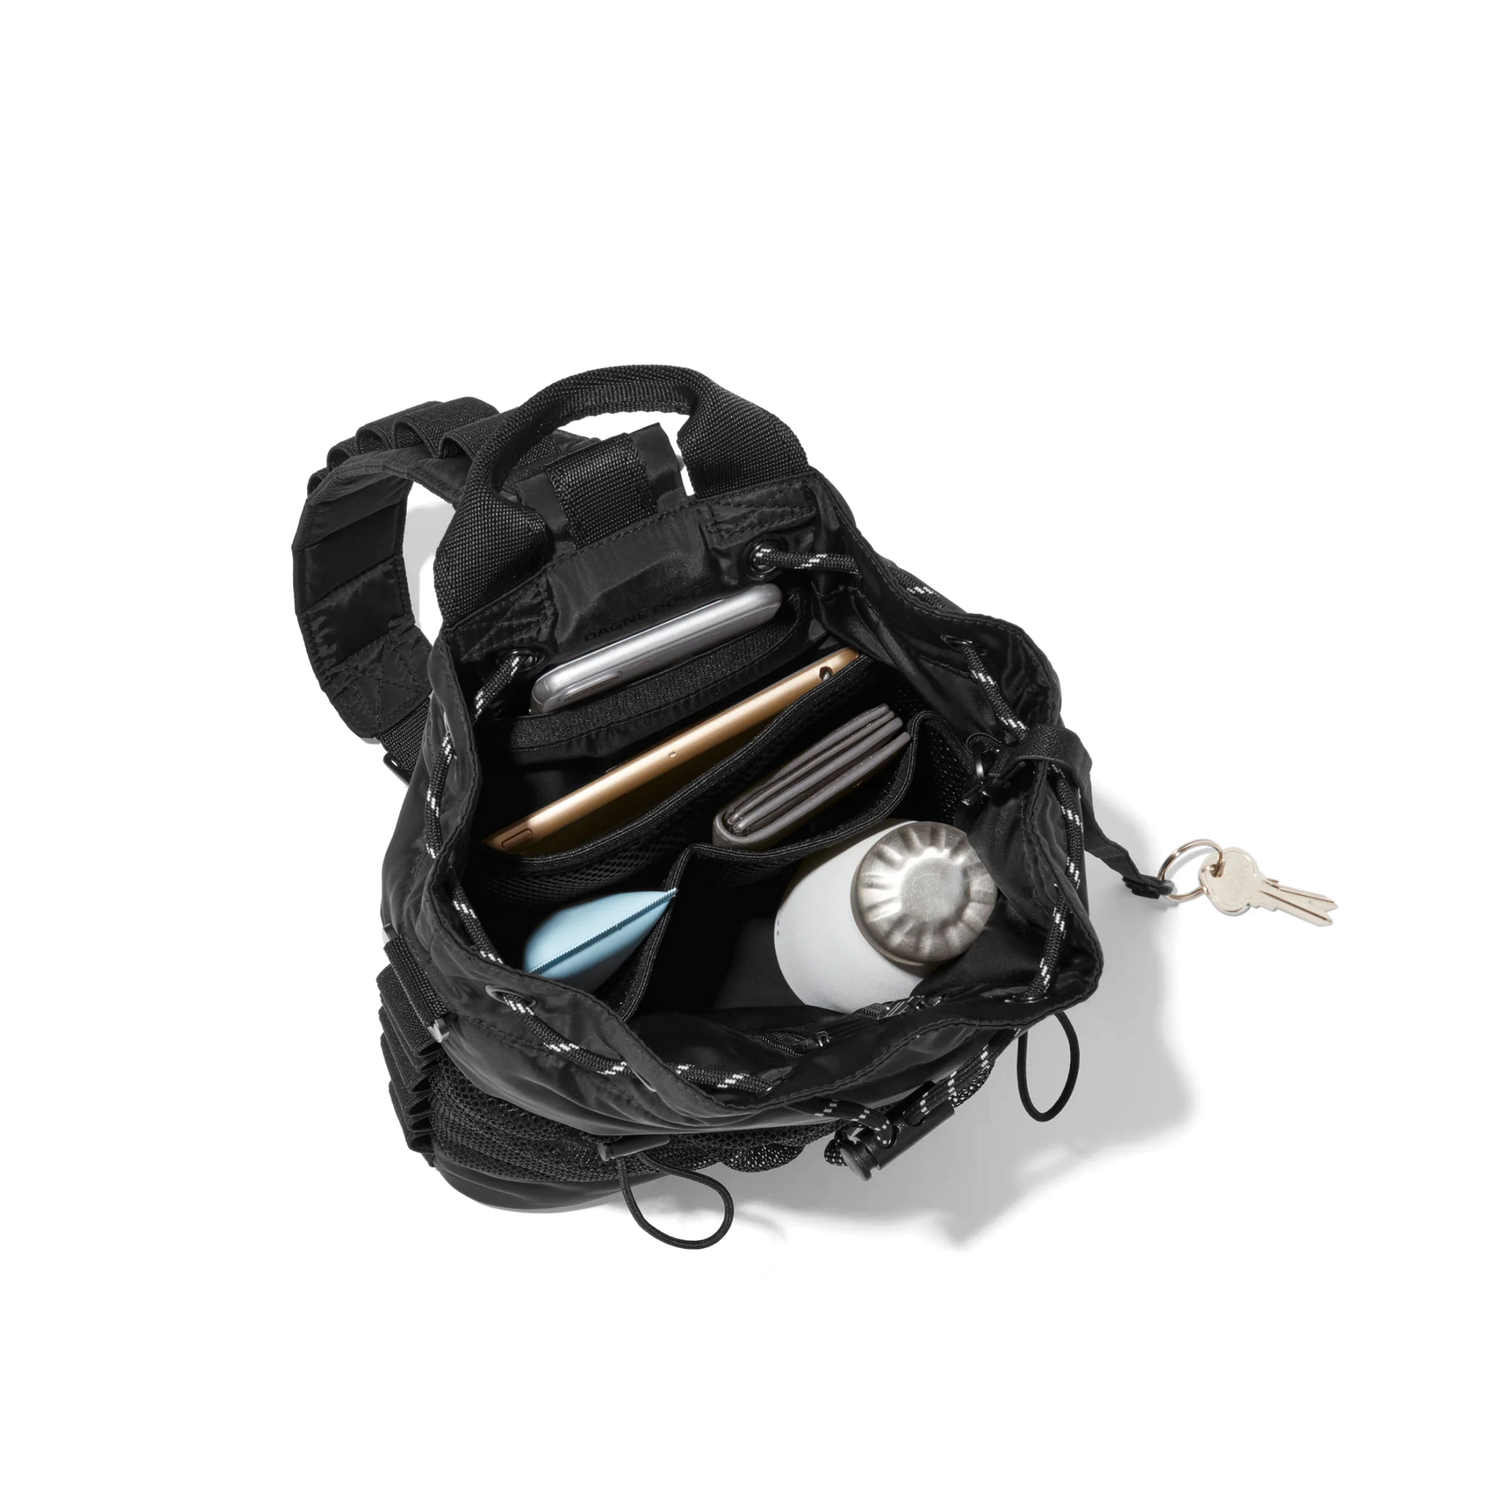 The Dagne Dover Walker Backpack can actually fit everything